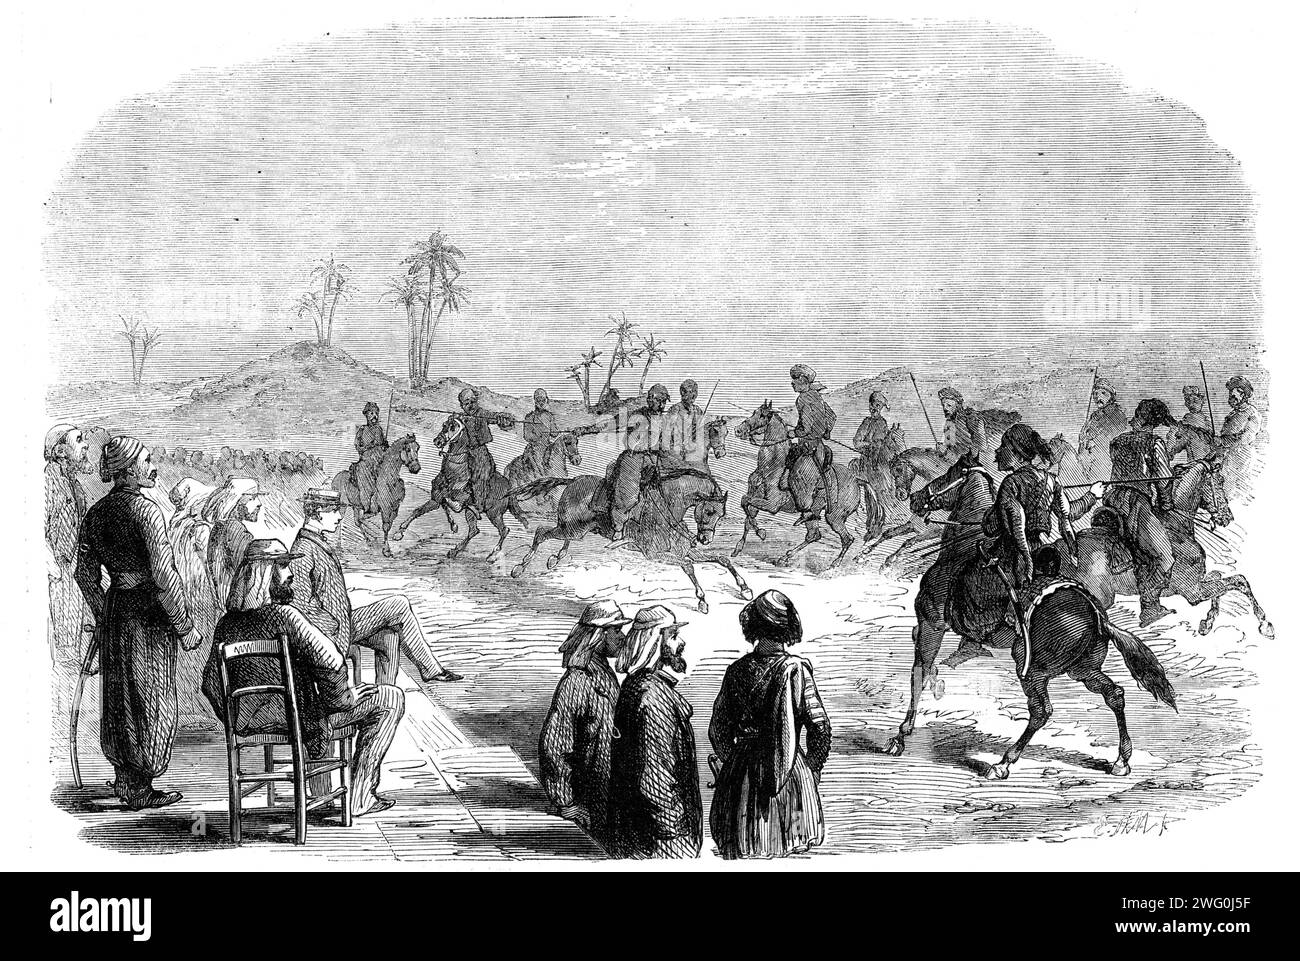 The Prince of Wales in Egypt: Jereed exercise performed by arnouts and arab chiefs before His Royal Highness a the Governor's Palace, Assiout, 1862. The future King Edward VII in Africa. 'The Prince, on his return from Upper Egypt, stopped at Assiout and saw the jereed exercise performed by some Arnouts and Arab chiefs...The chieftains exhibited great proficiency in throwing the jereed (a light spear), and performed many feats of dexterity while their horses were at full gallop, sometimes dashing among each other in a movement like a wild dance, and going through all the operations of mimic wa Stock Photo